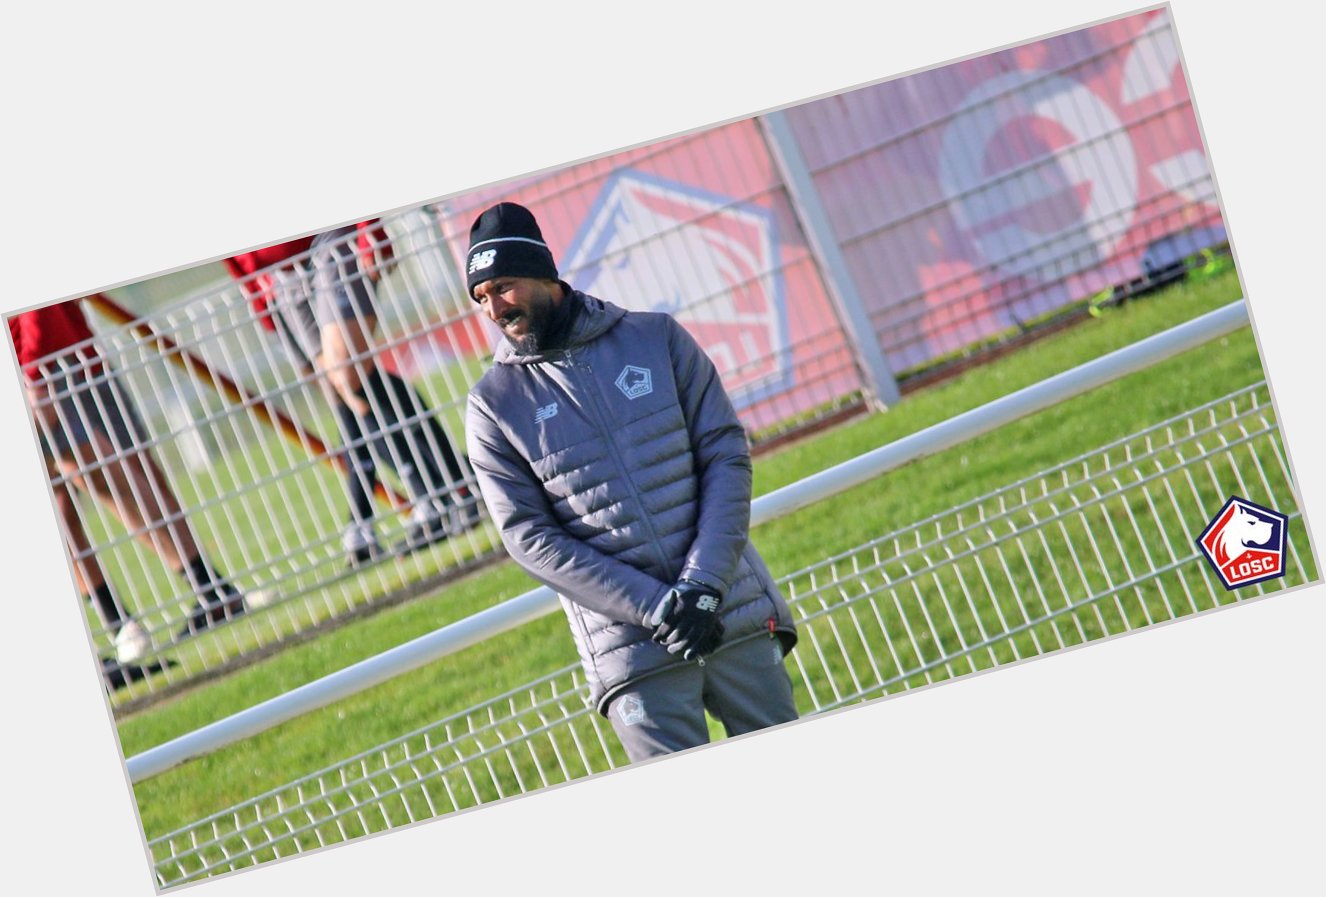  A very happy birthday to LOSC youth attacking coach Nicolas Anelka 4  0  today! 